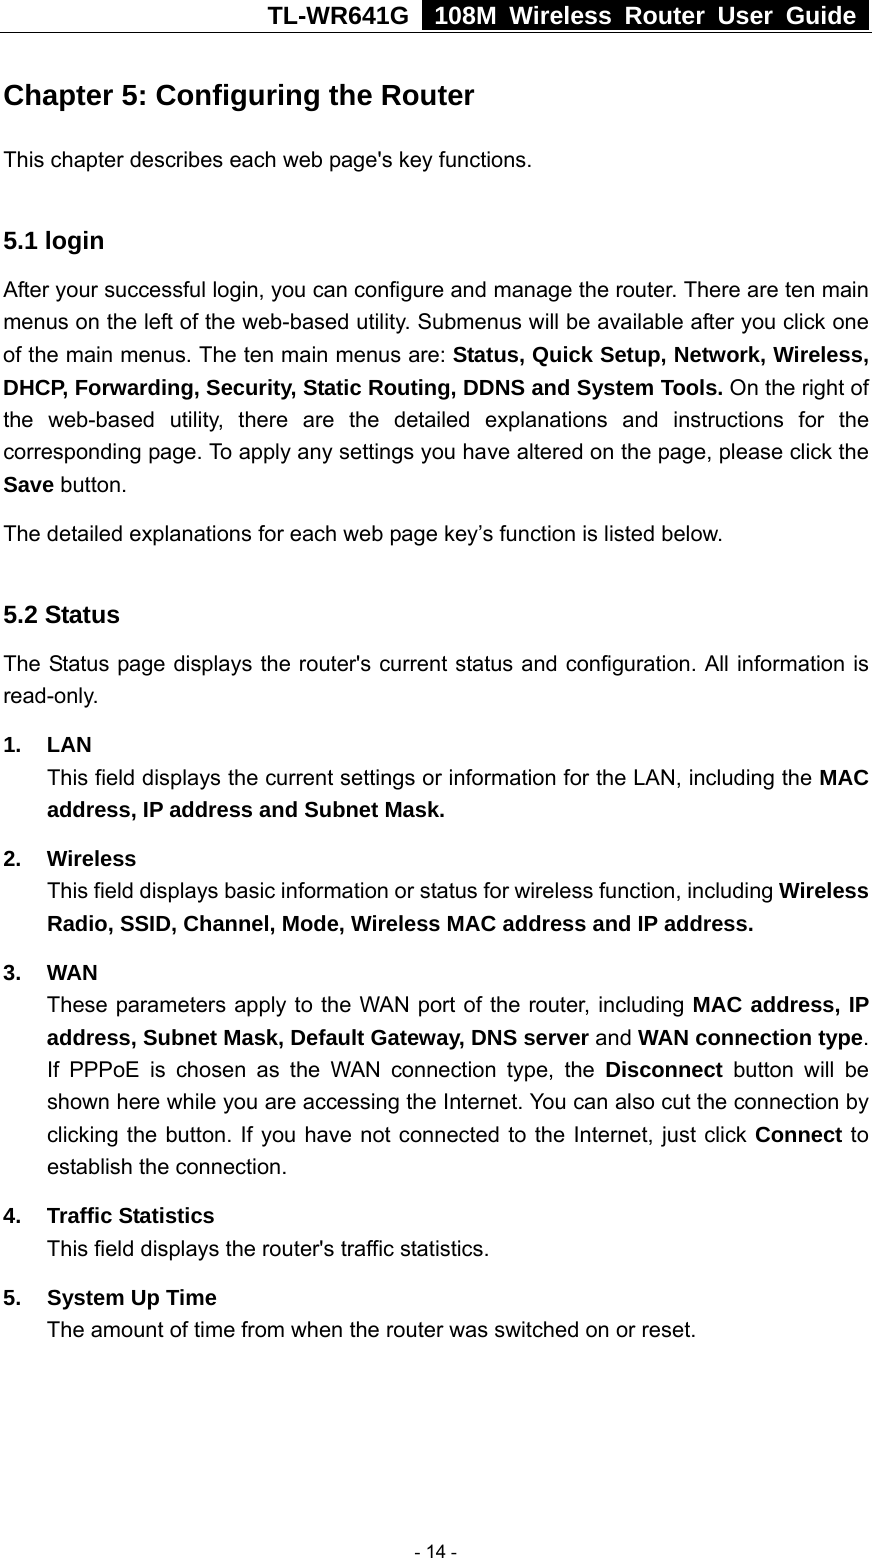 TL-WR641G   108M Wireless Router User Guide  Chapter 5: Configuring the Router This chapter describes each web page&apos;s key functions.  5.1 login   After your successful login, you can configure and manage the router. There are ten main menus on the left of the web-based utility. Submenus will be available after you click one of the main menus. The ten main menus are: Status, Quick Setup, Network, Wireless, DHCP, Forwarding, Security, Static Routing, DDNS and System Tools. On the right of the web-based utility, there are the detailed explanations and instructions for the corresponding page. To apply any settings you have altered on the page, please click the Save button.   The detailed explanations for each web page key’s function is listed below.    5.2 Status The Status page displays the router&apos;s current status and configuration. All information is read-only. 1. LAN This field displays the current settings or information for the LAN, including the MAC address, IP address and Subnet Mask. 2. Wireless This field displays basic information or status for wireless function, including Wireless Radio, SSID, Channel, Mode, Wireless MAC address and IP address. 3. WAN These parameters apply to the WAN port of the router, including MAC address, IP address, Subnet Mask, Default Gateway, DNS server and WAN connection type. If PPPoE is chosen as the WAN connection type, the Disconnect button will be shown here while you are accessing the Internet. You can also cut the connection by clicking the button. If you have not connected to the Internet, just click Connect to establish the connection. 4. Traffic Statistics This field displays the router&apos;s traffic statistics.   5.  System Up Time The amount of time from when the router was switched on or reset.   - 14 - 